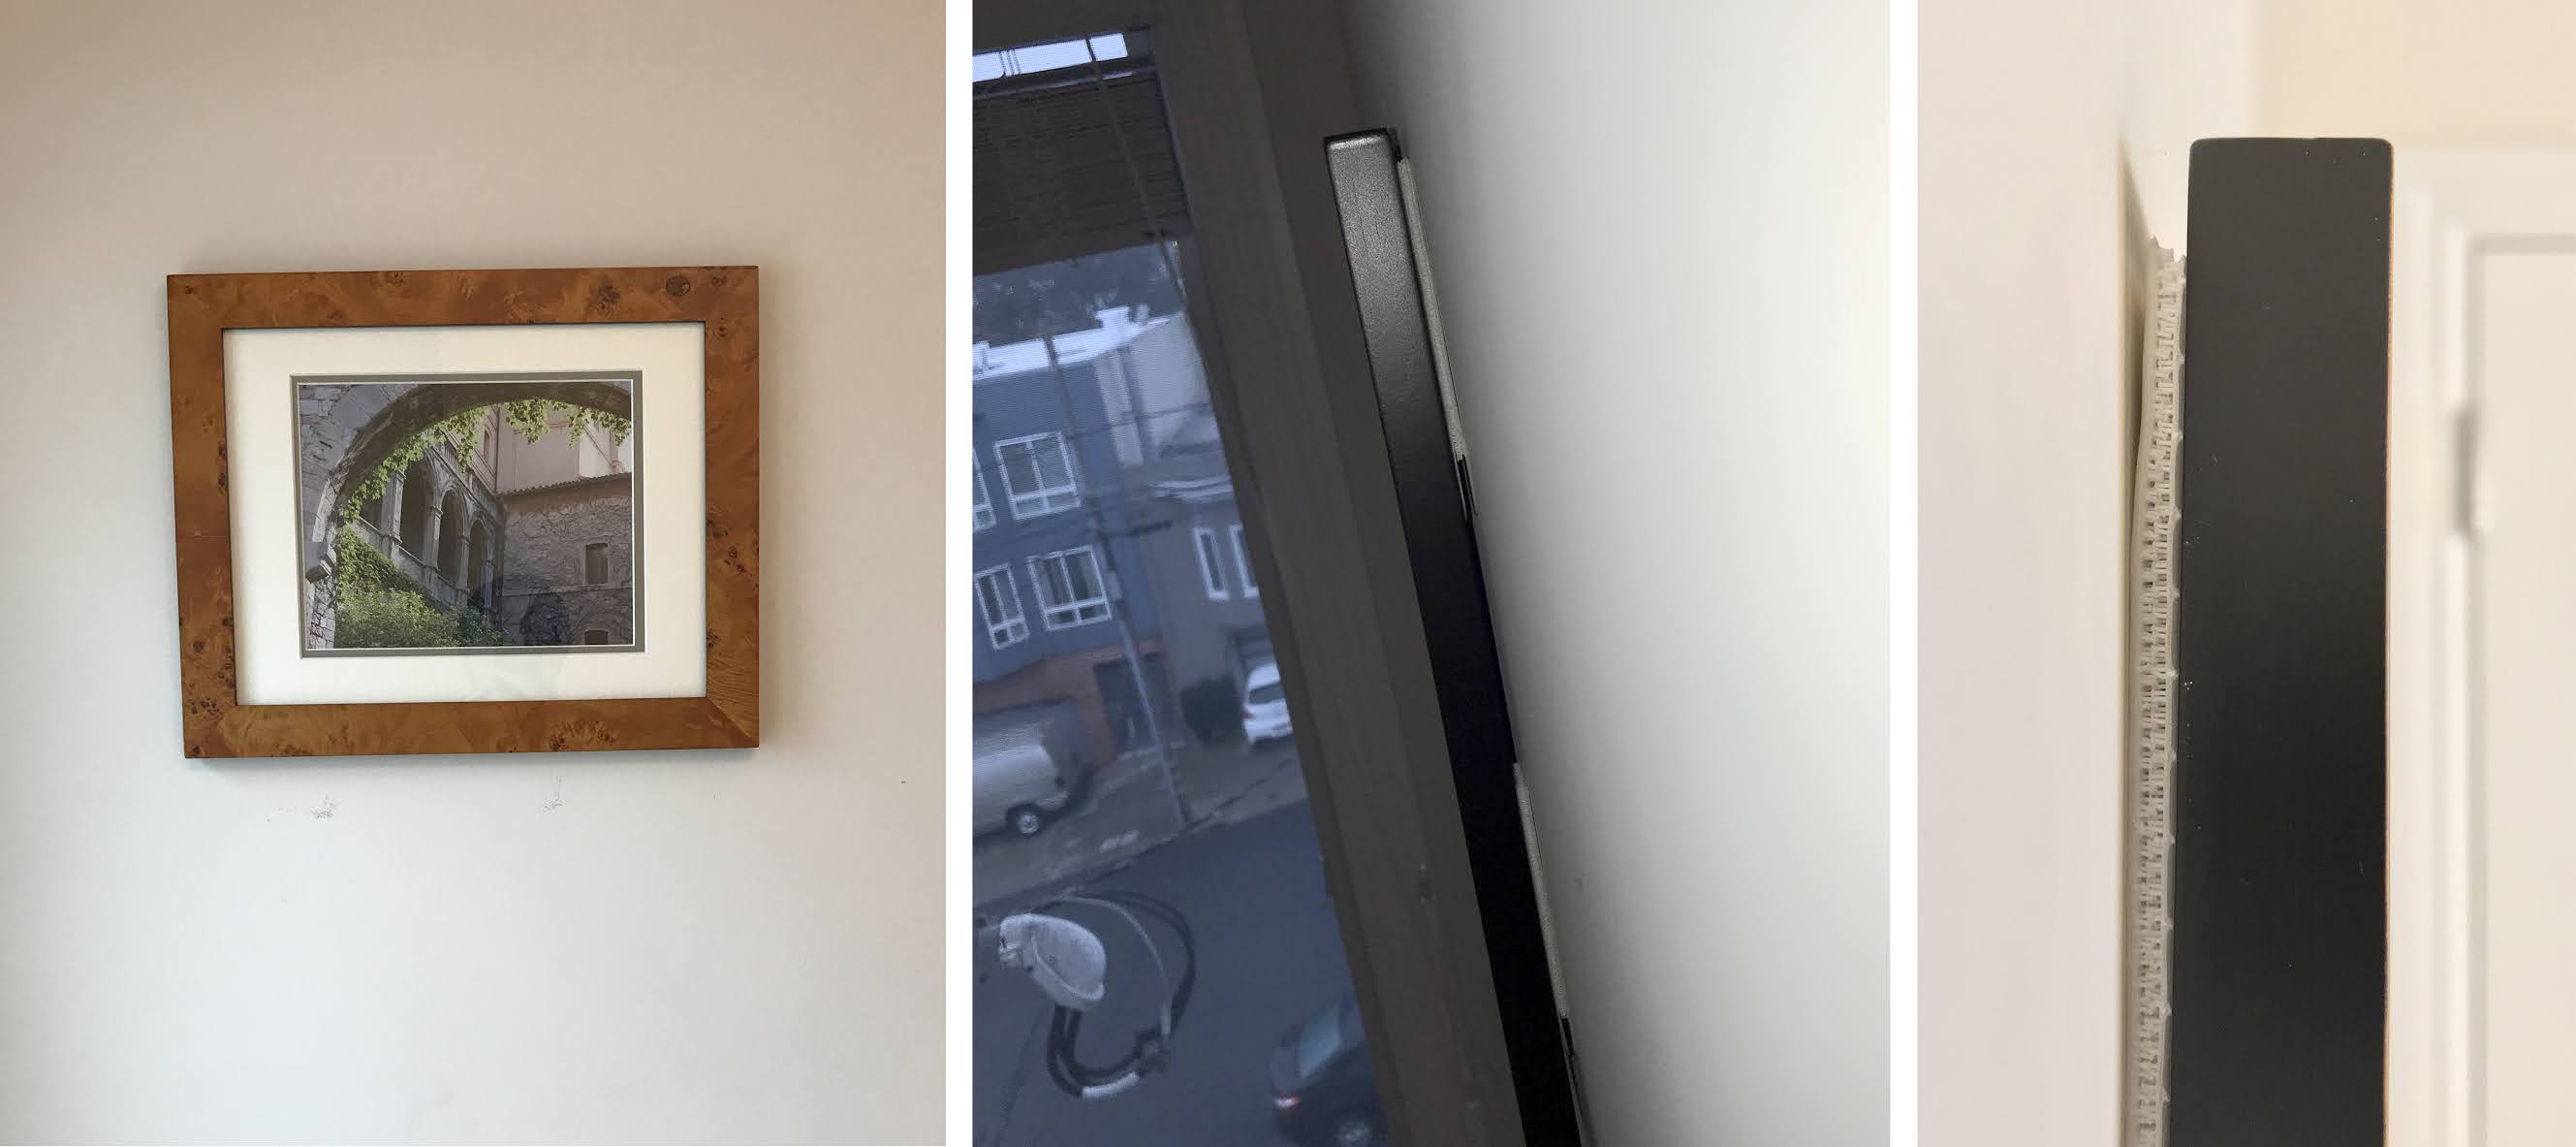 QUAKETIPS: Command Strips for picture hanging, 3 years later: A couple of  failures to report